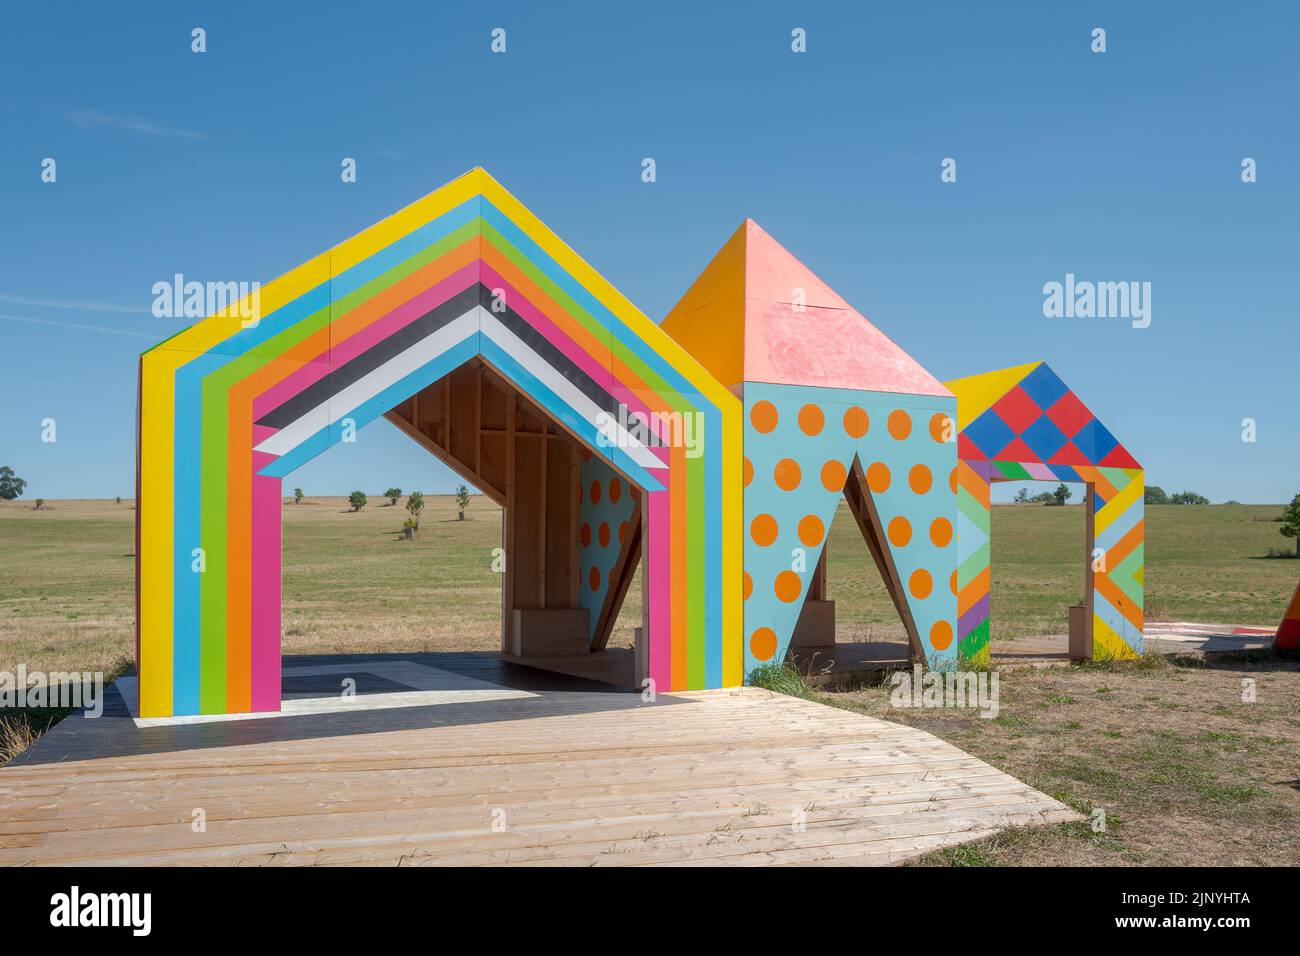 A site specific art installation by artist Morag Myerscough at Compton Verney, Warwickshire, UK. Stock Photo